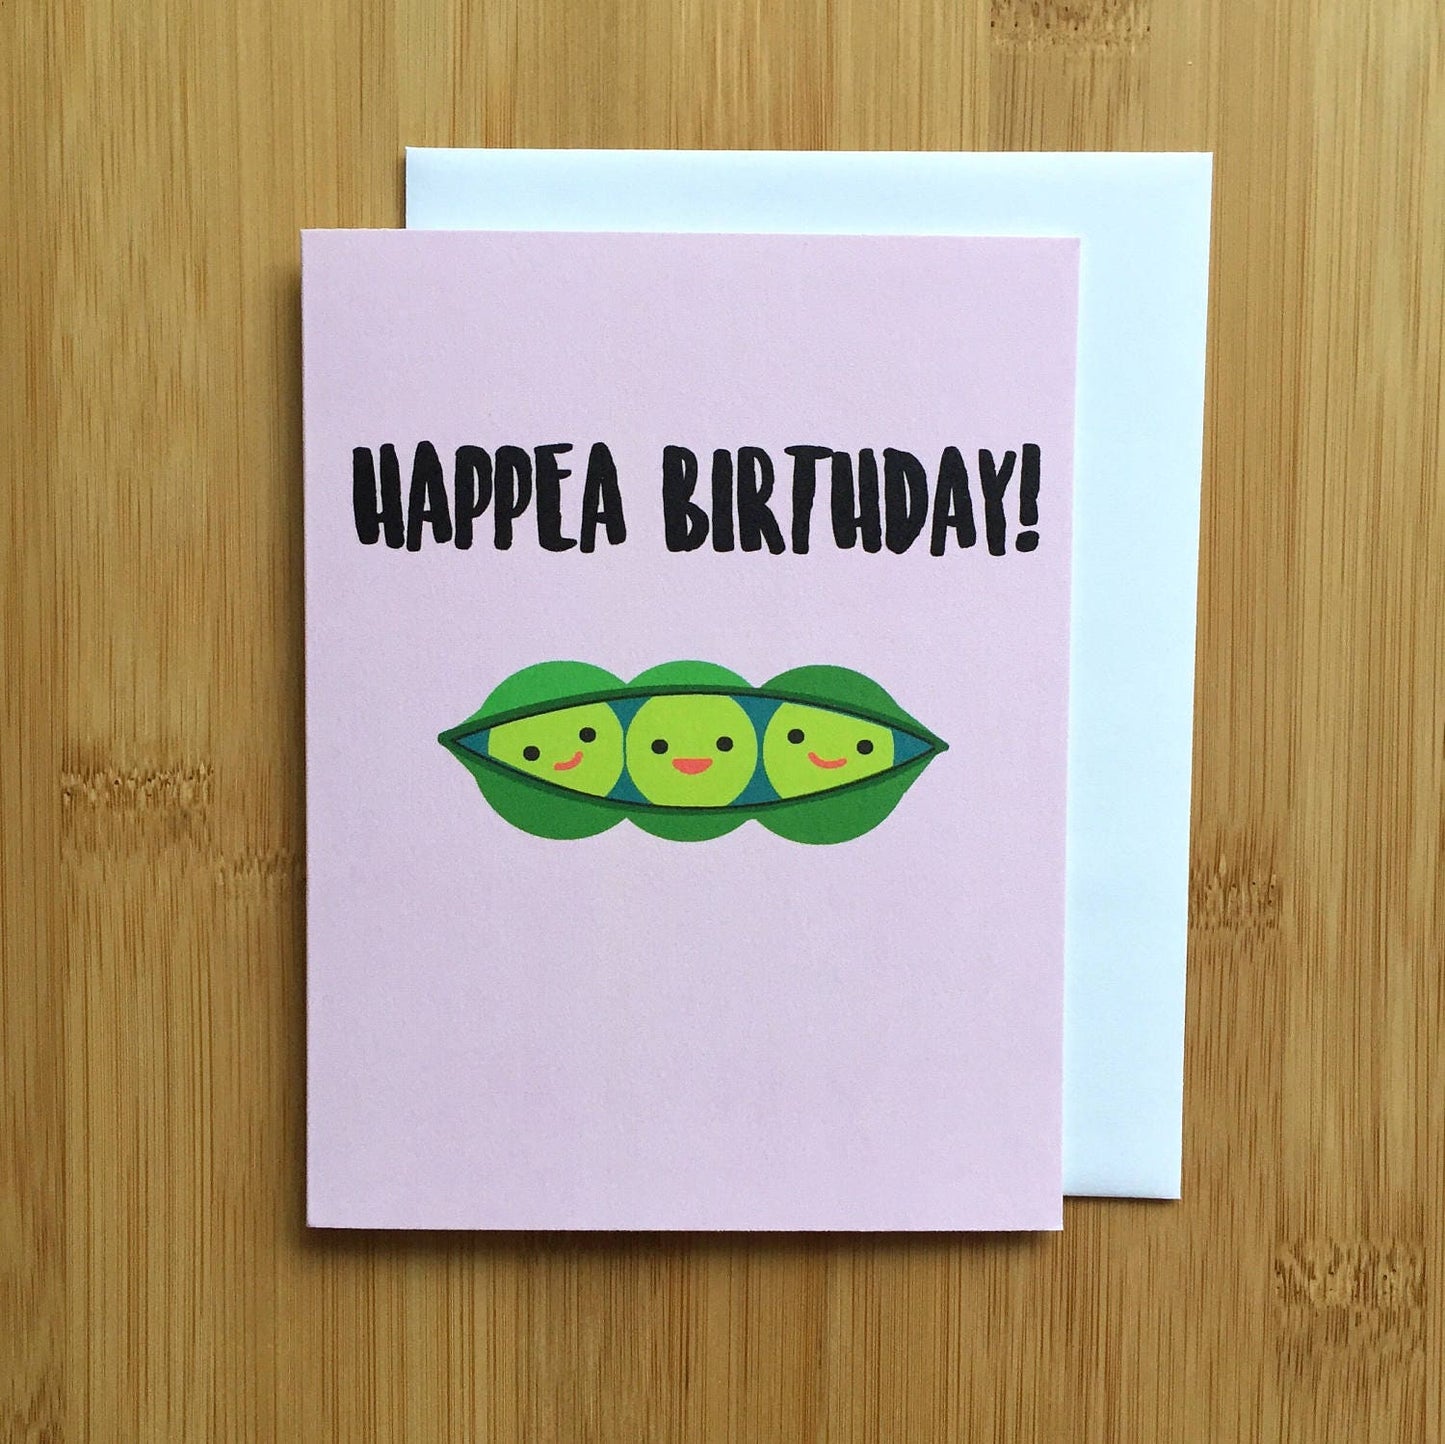 Peas in a Pod Birthday Card - A2 Handmade Card, Punny Vegetable Pea Pods Card with foiled lettering